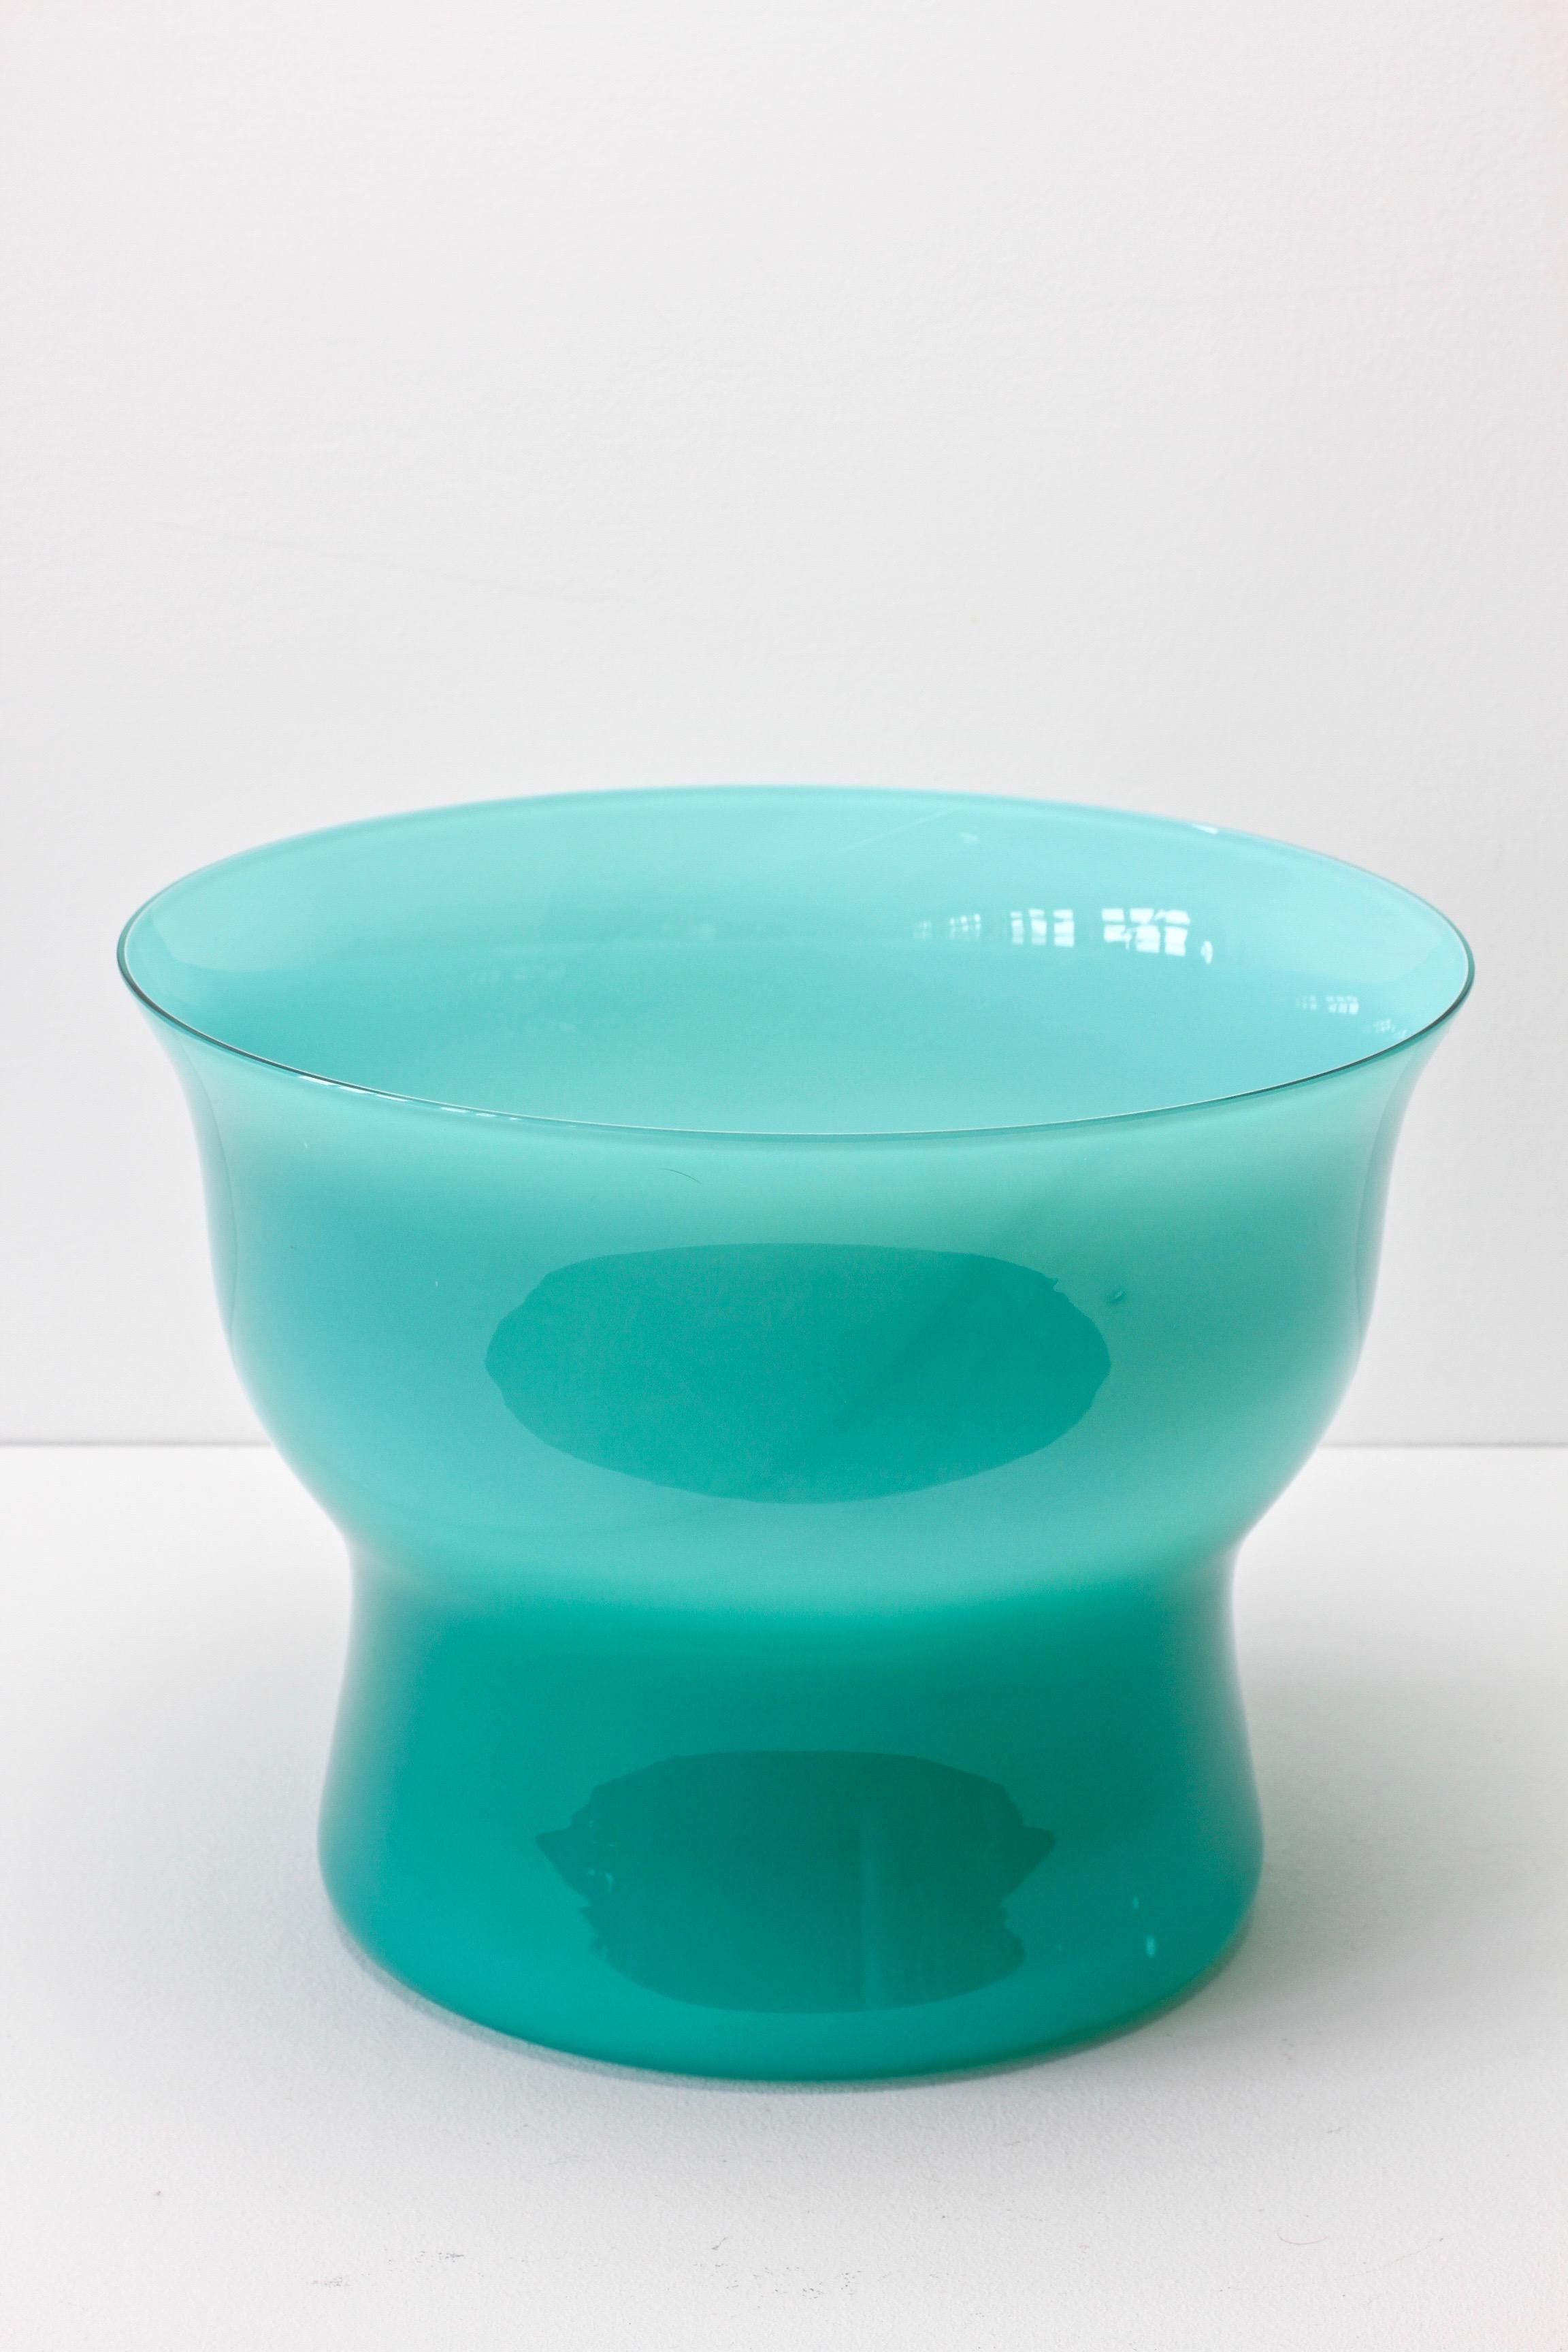 vintage turquoise glass